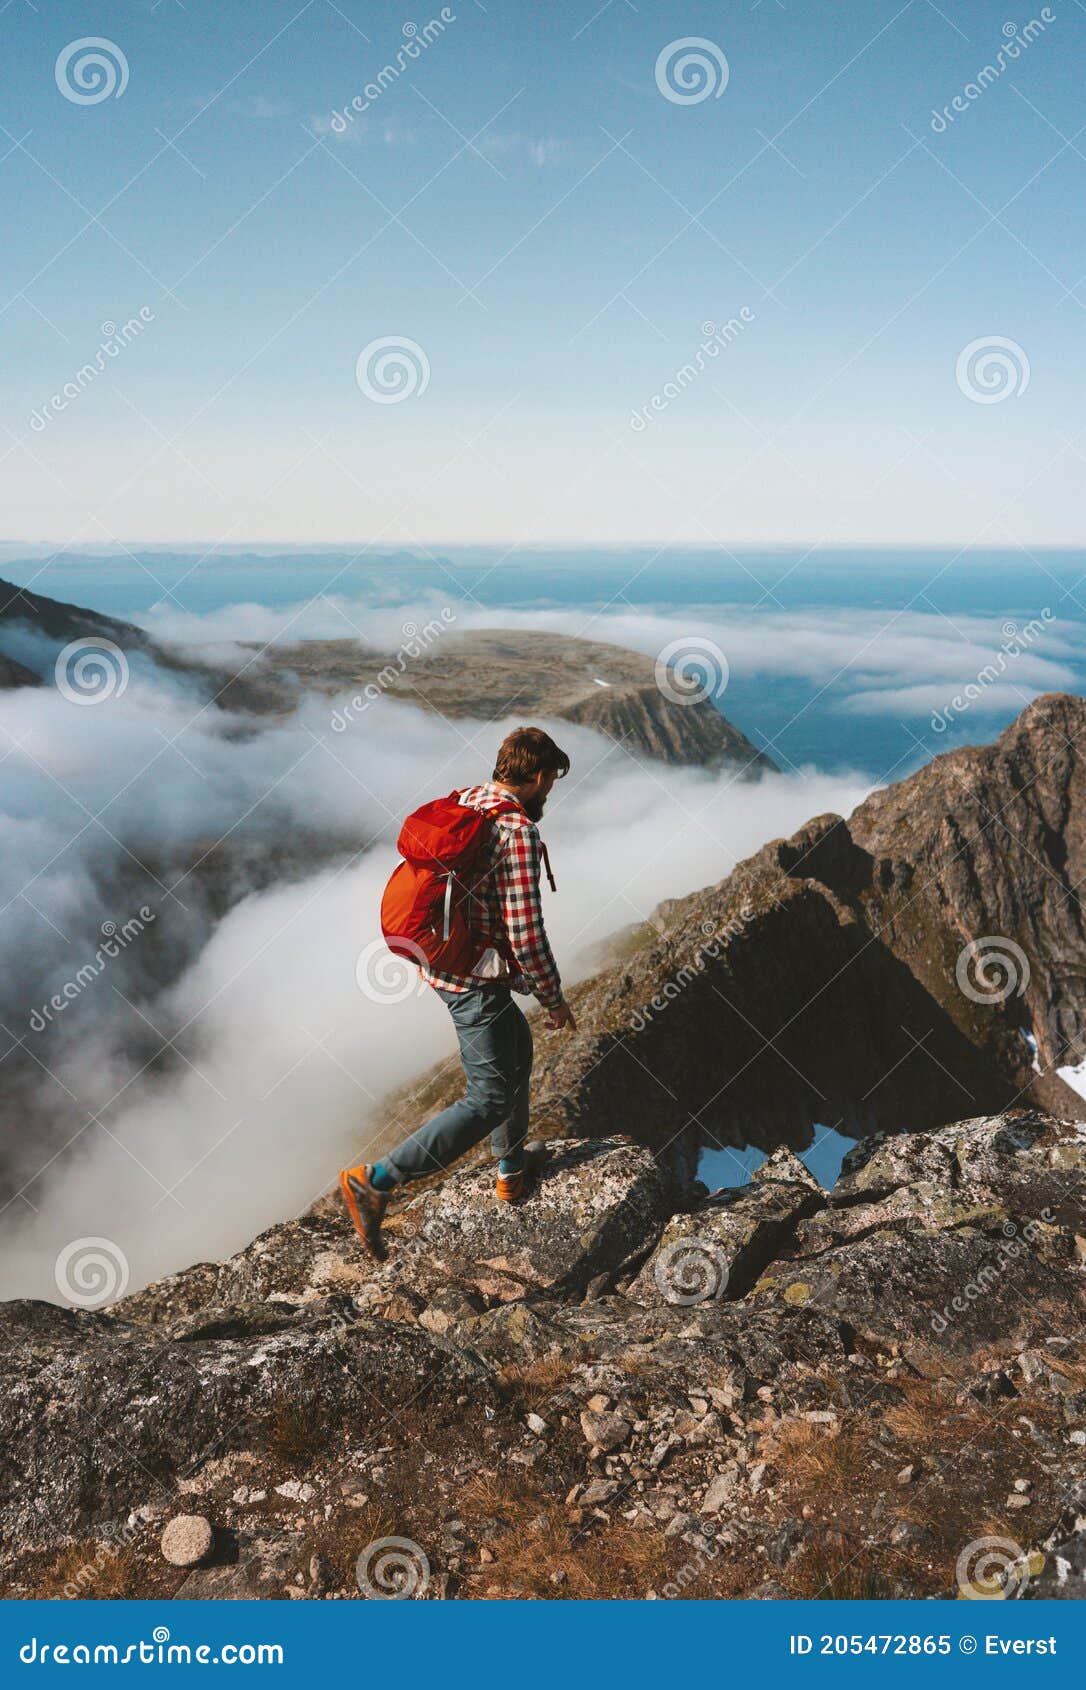 man hiking solo on mountain ridge travel lifestyle adventures active outdoor vacation